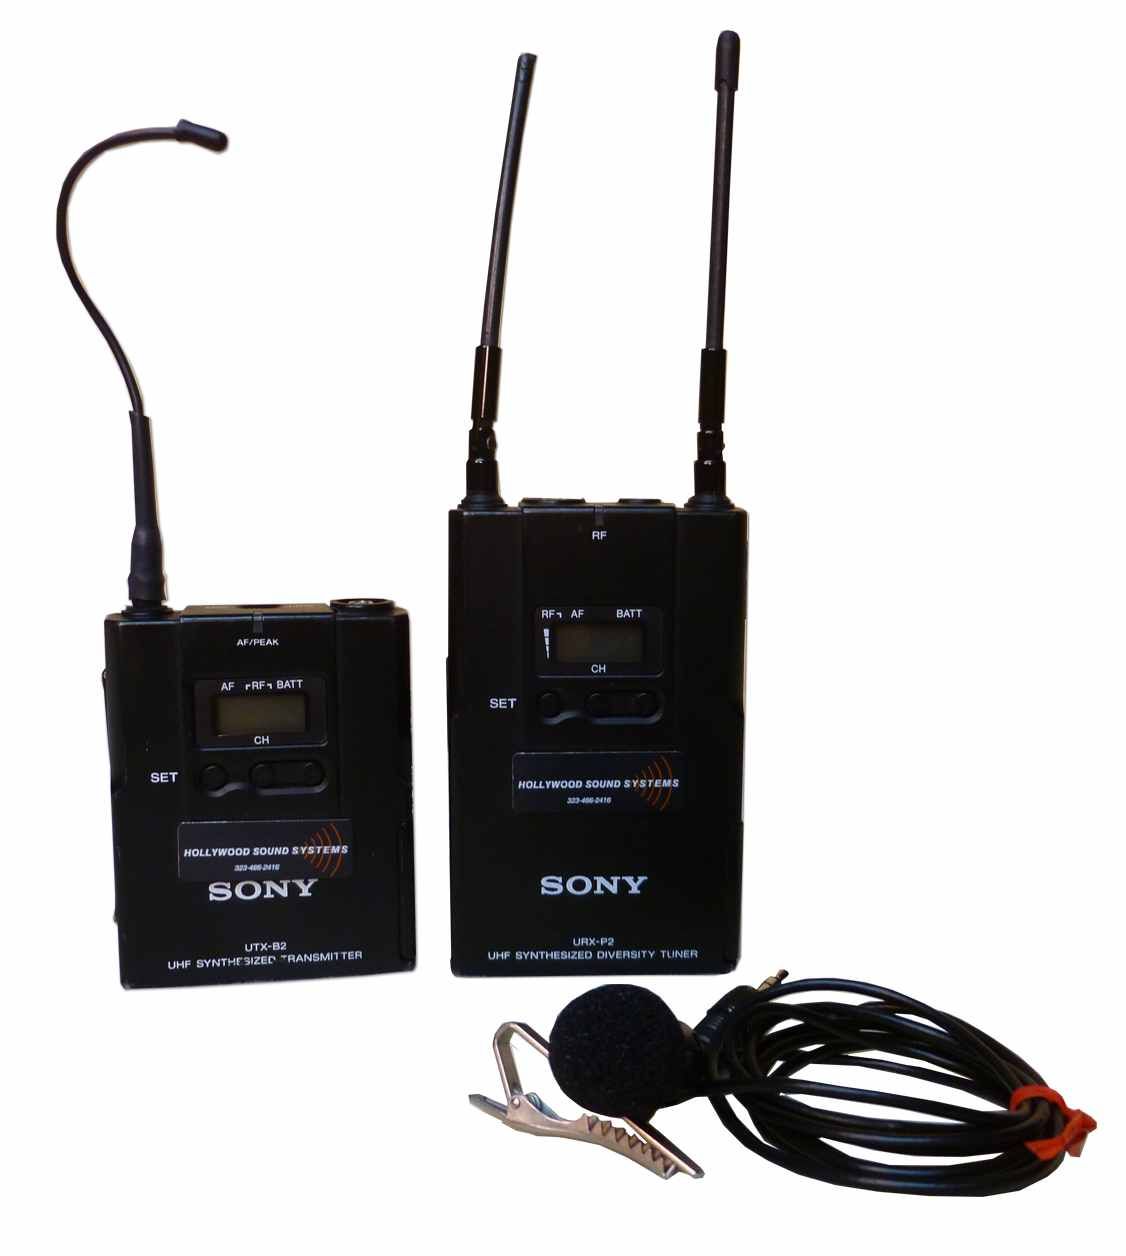 The Sony UWP-V1 Wireless Lavalier Microphone System is at Hollywood Sound Systems.